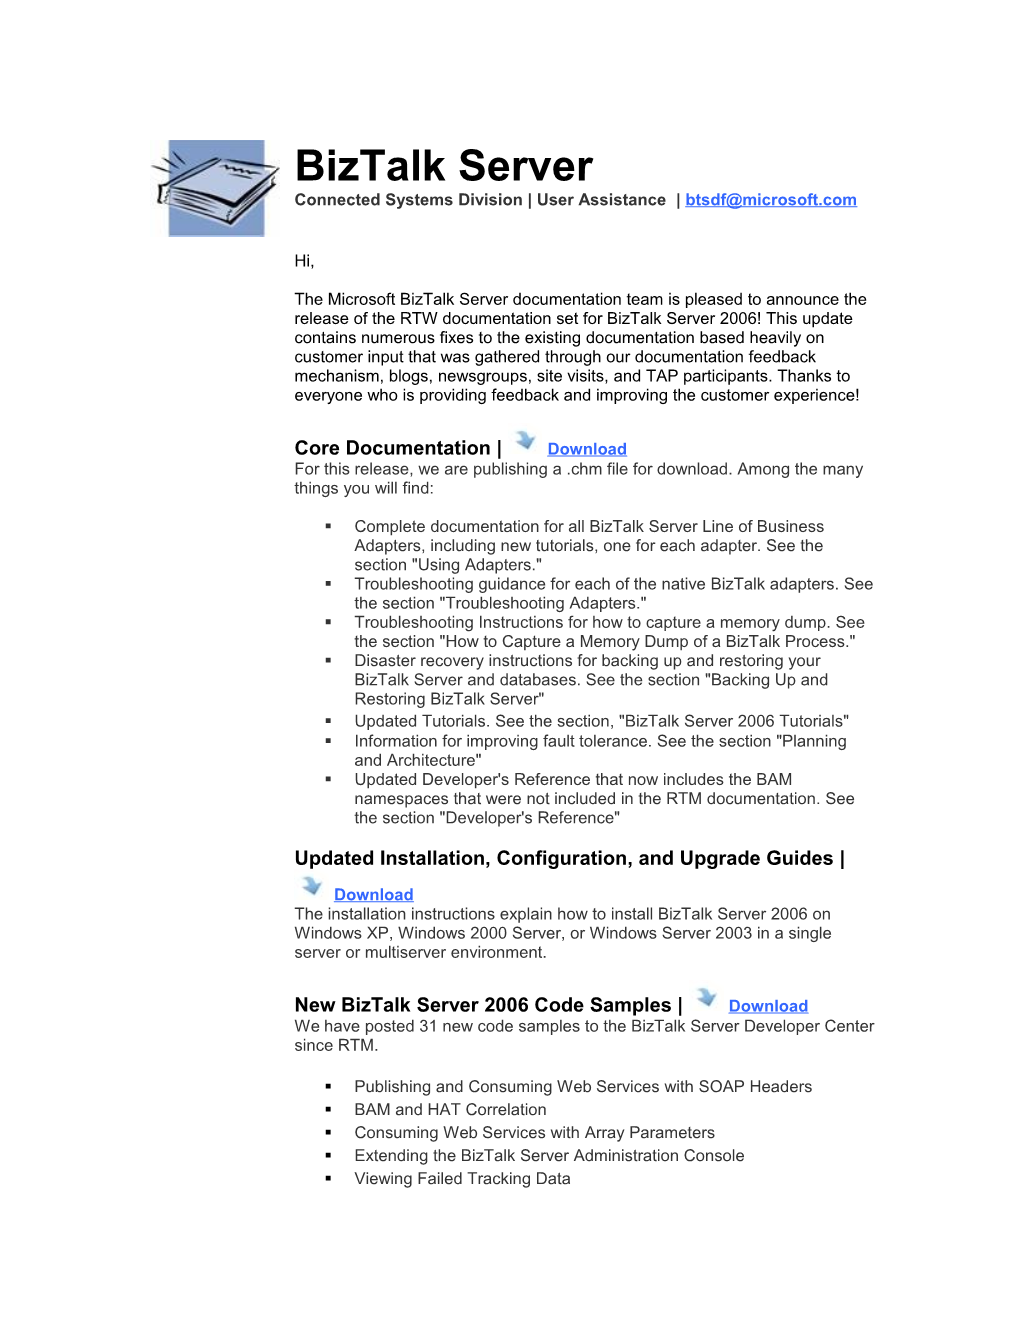 Complete Documentation for All Biztalk Server Line of Business Adapters, Including New